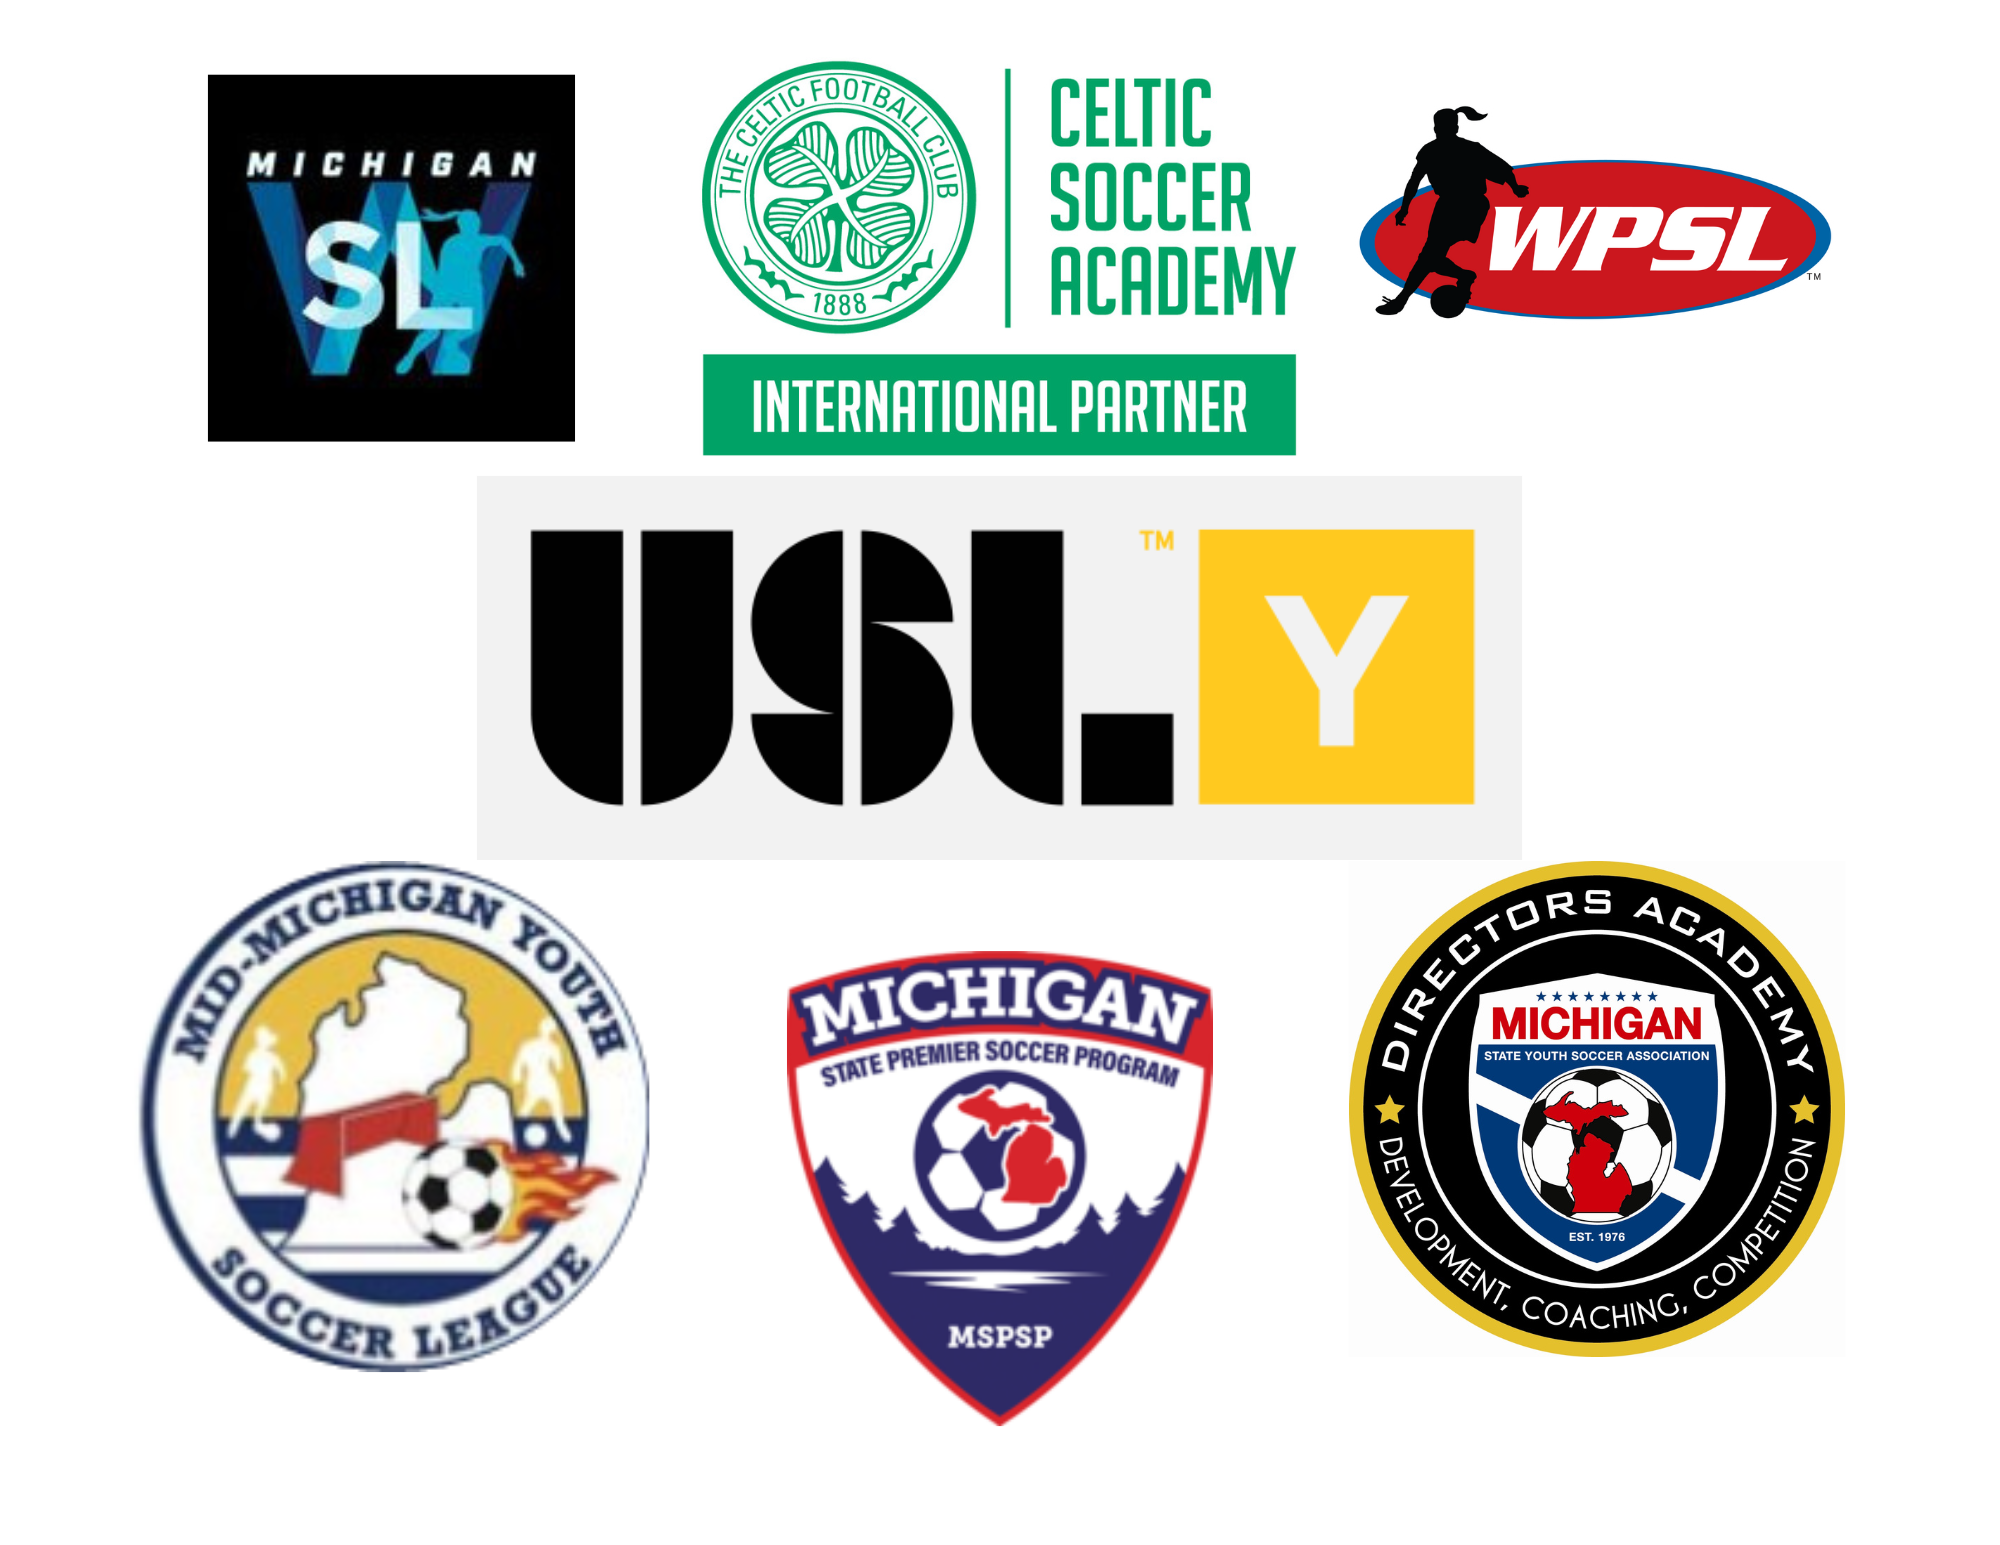 Our Leagues and affiliations